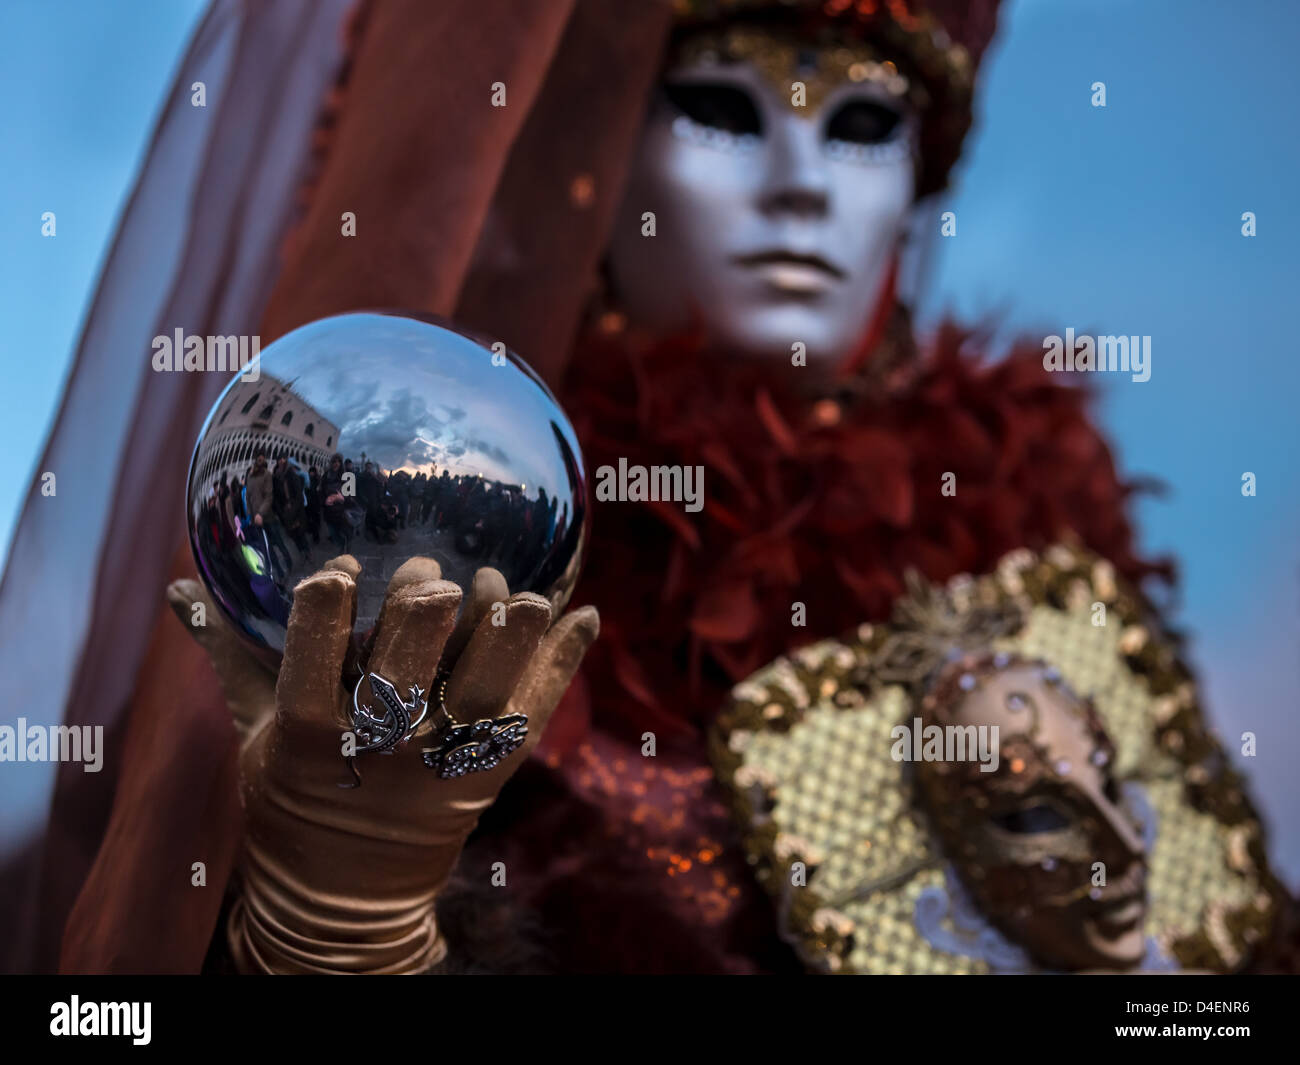 A woman dressed up for the Carnival in Venice holds a metal ball in which St Marco and people are reflected, Veneto, Italy Stock Photo